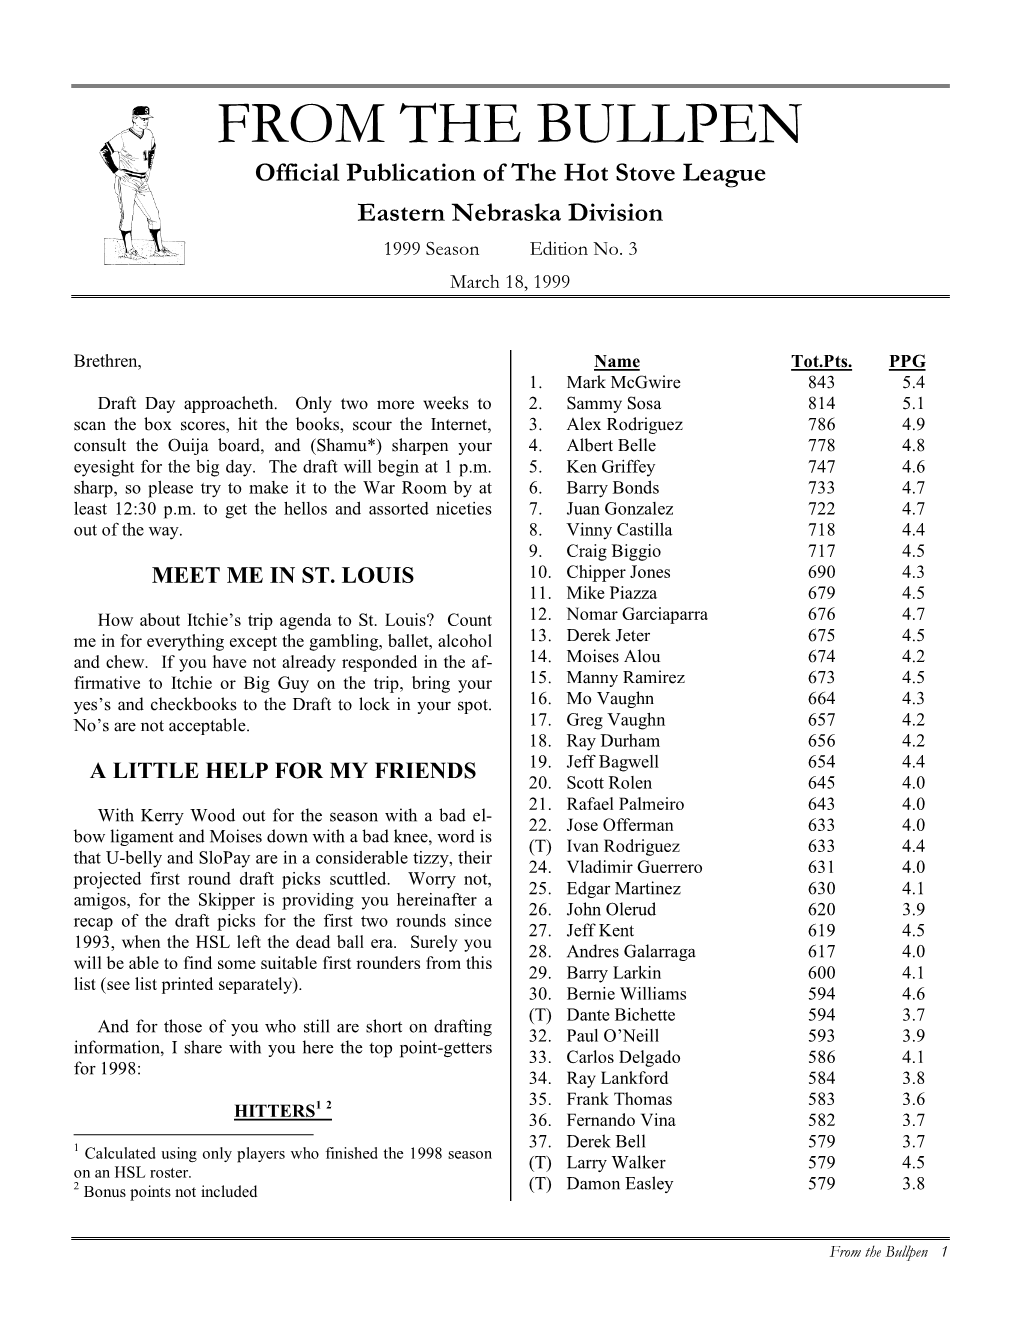 FROM the BULLPEN Official Publication of the Hot Stove League Eastern Nebraska Division 1999 Season Edition No